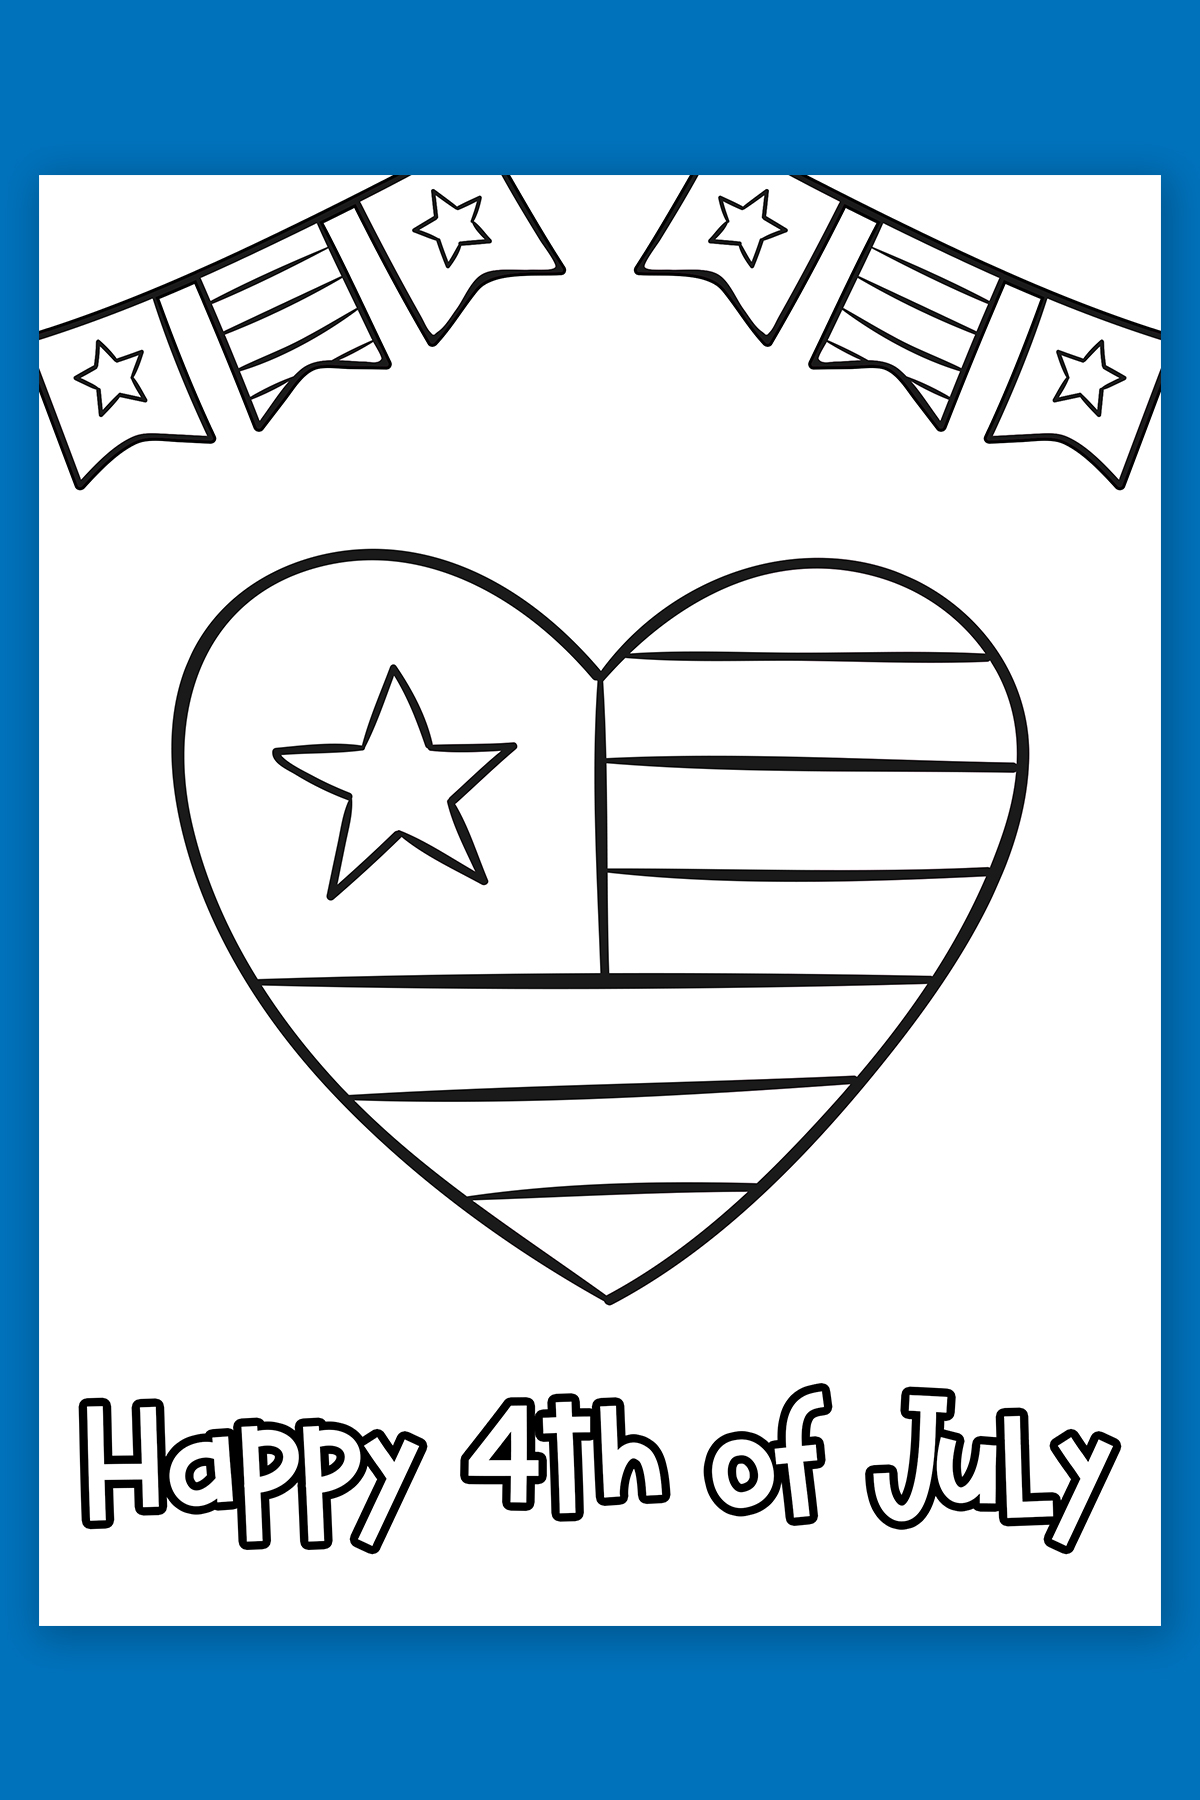 This free 4th of July coloring page says Happy 4th of July and features a patriotic banner and a heart with stripes and one star.